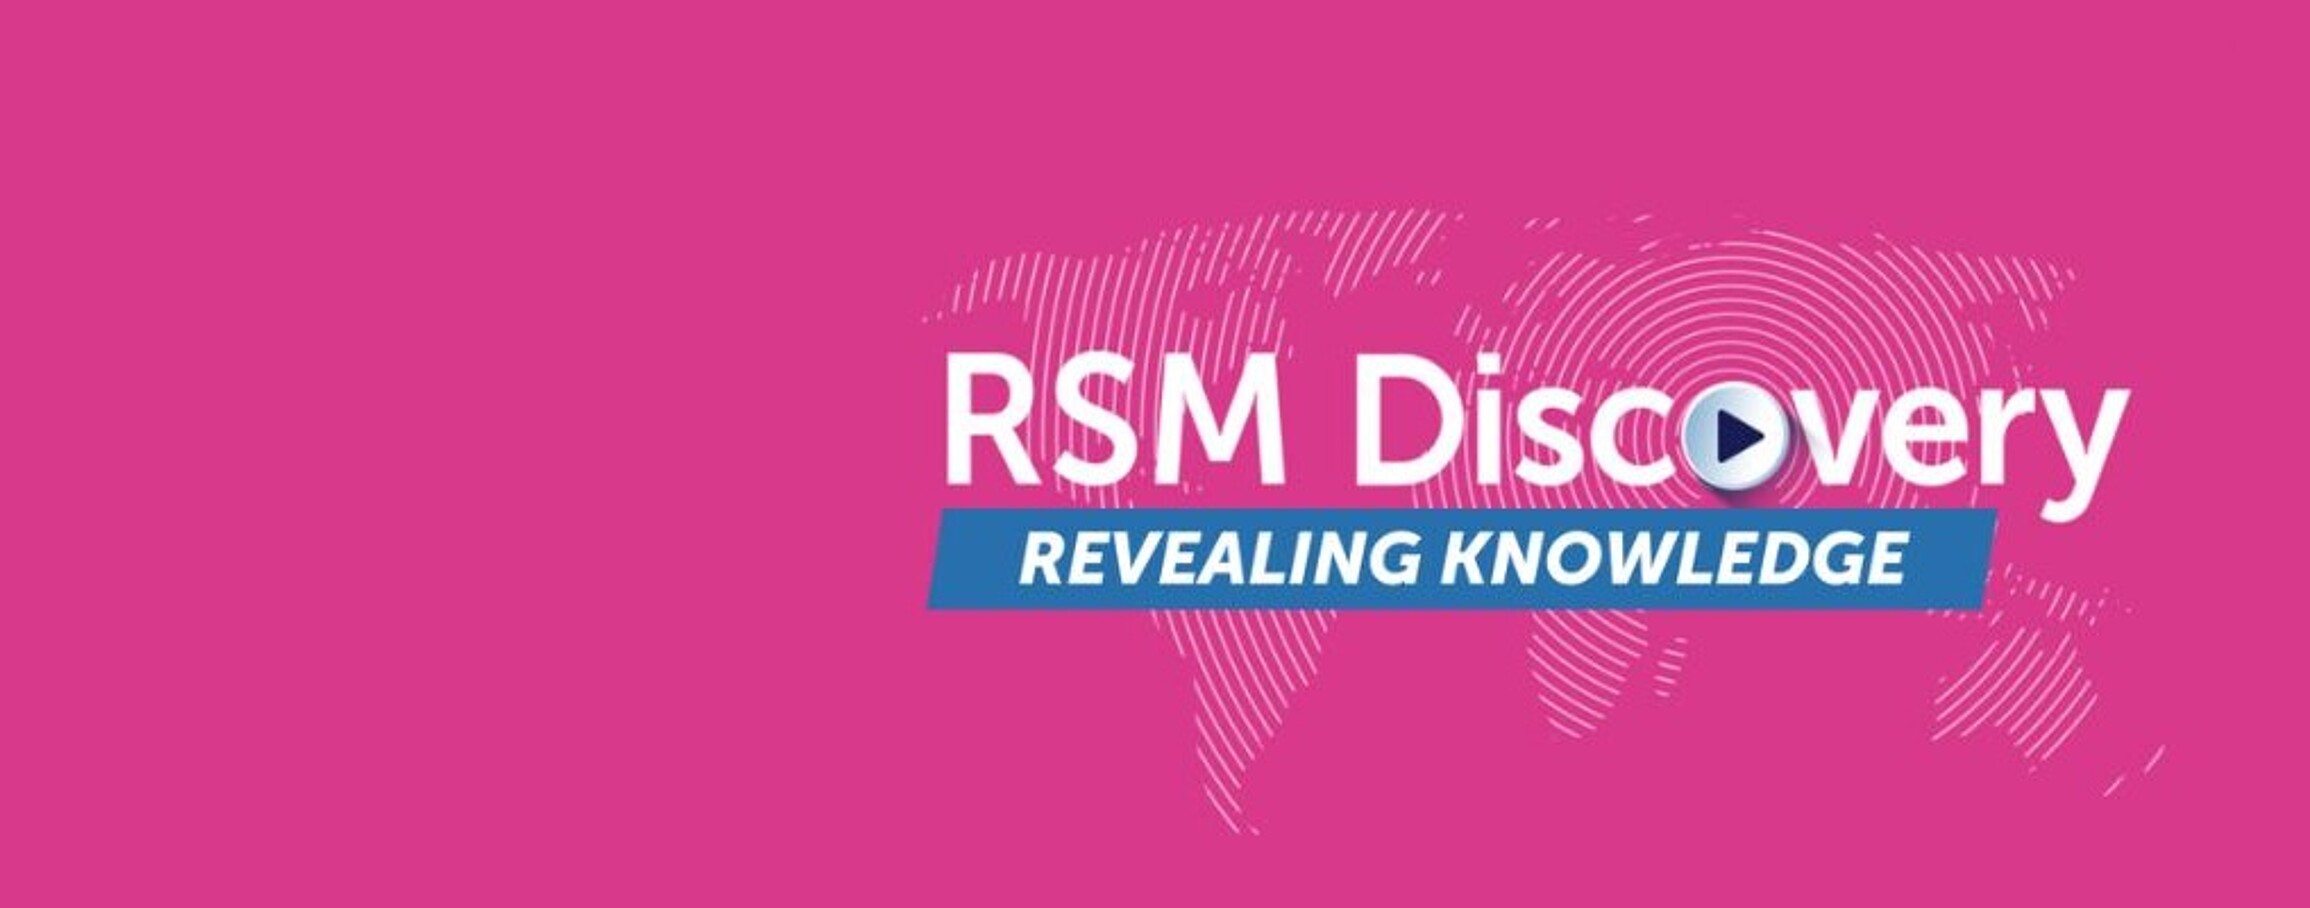 Header image for RSM Discovery, representing the research stories and articles section of the Rotterdam School of Management website.